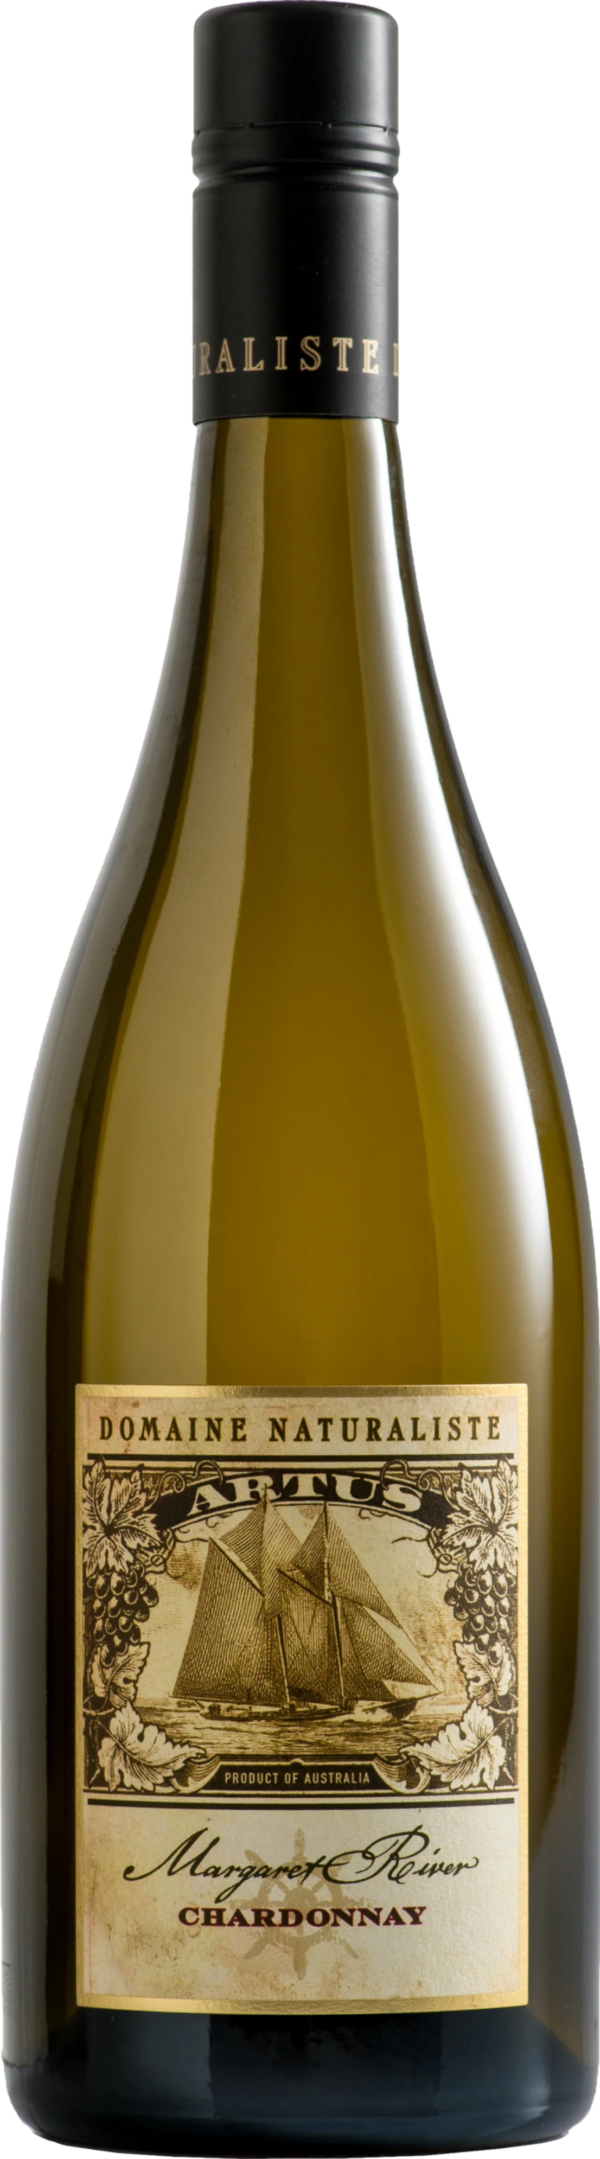 Product image of Domaine Naturaliste Artus Chardonnay 2020 from 8wines